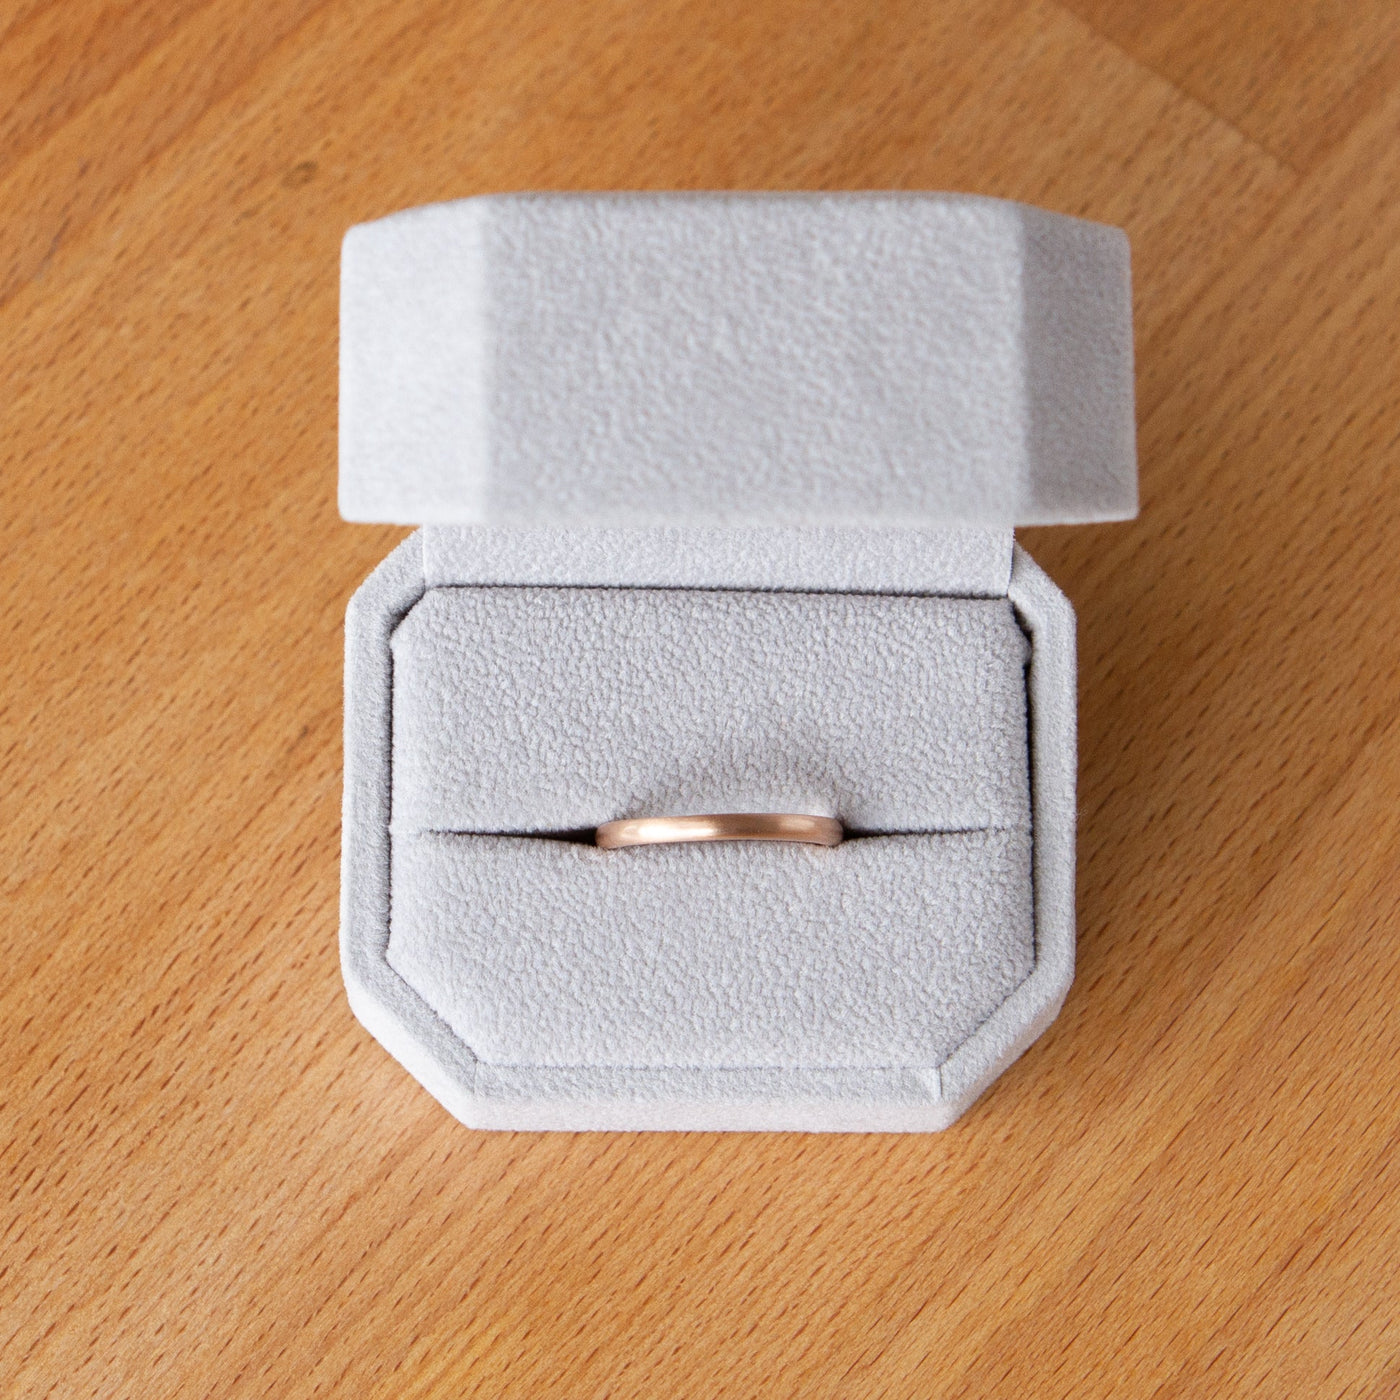 Thin half round Diablo rose gold brushed wedding band in a ring box